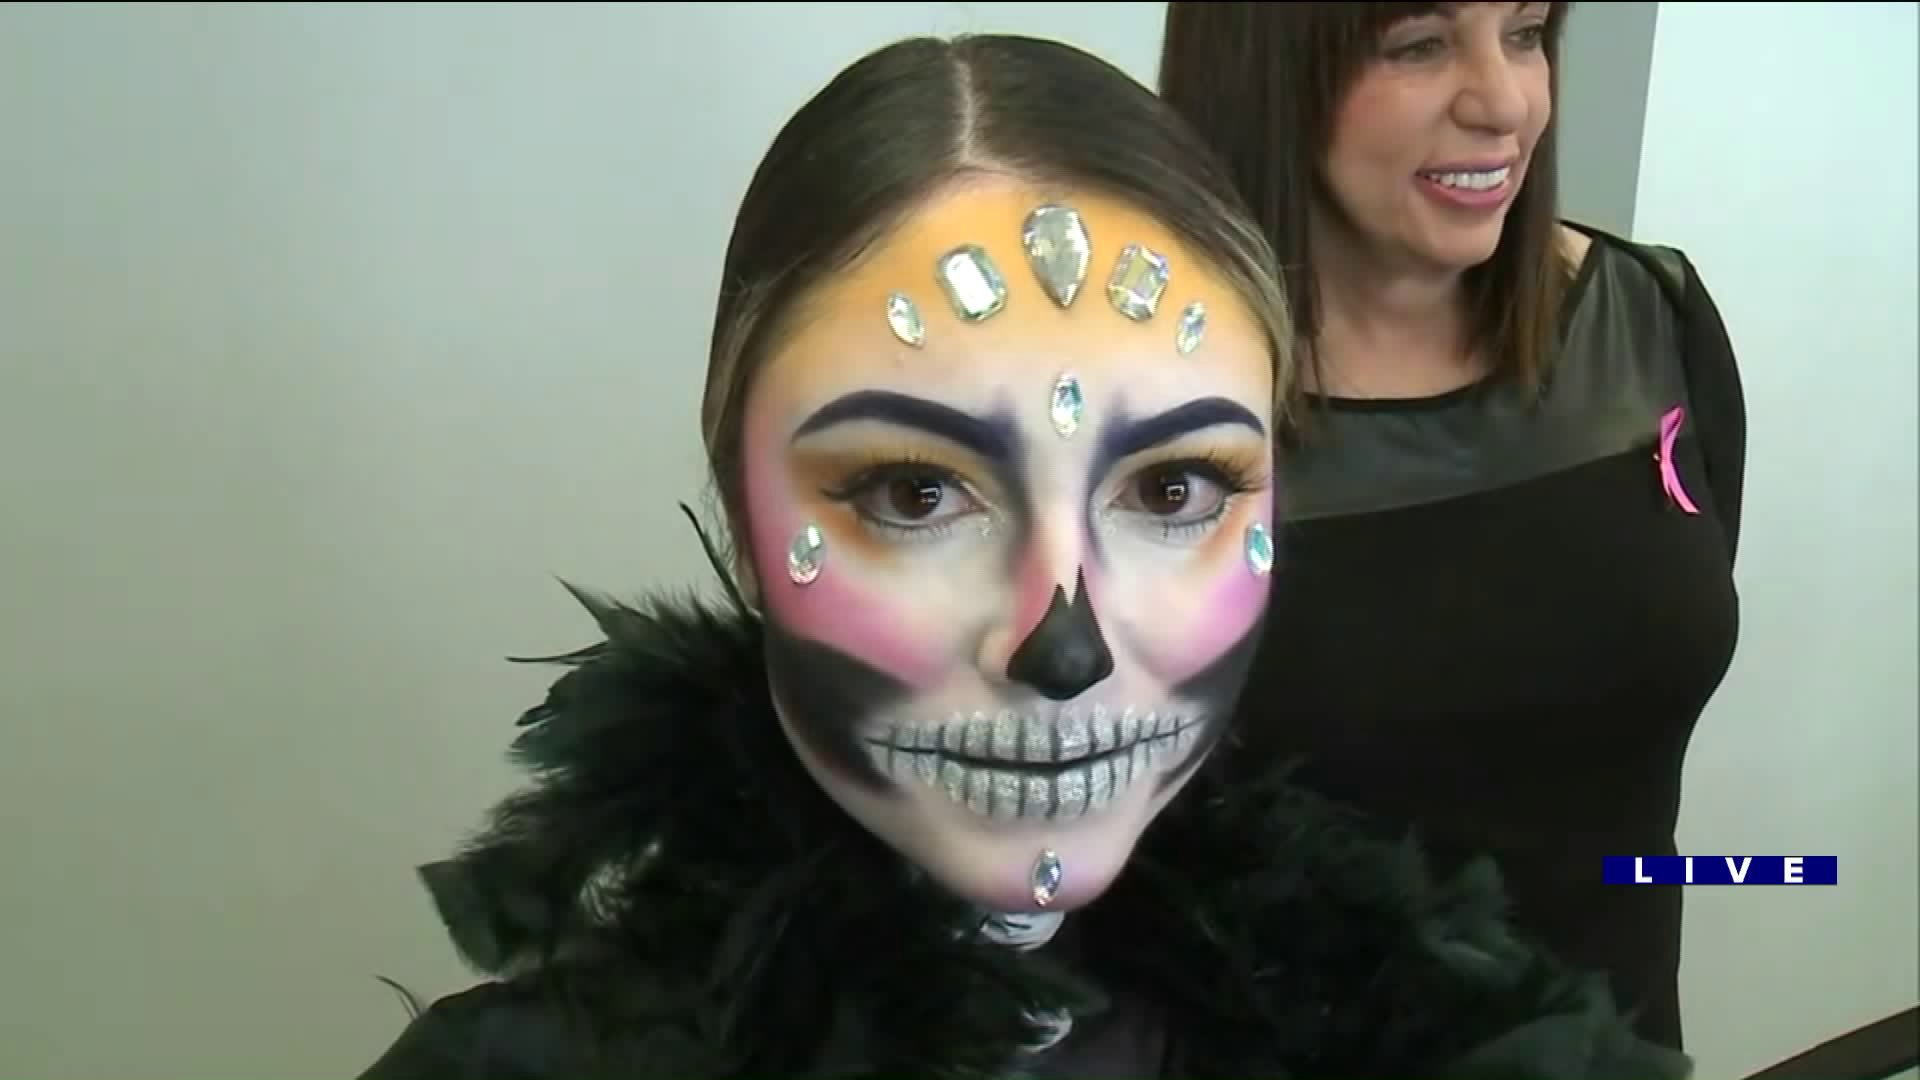 Around Town previews some Halloween looks at Make Up First